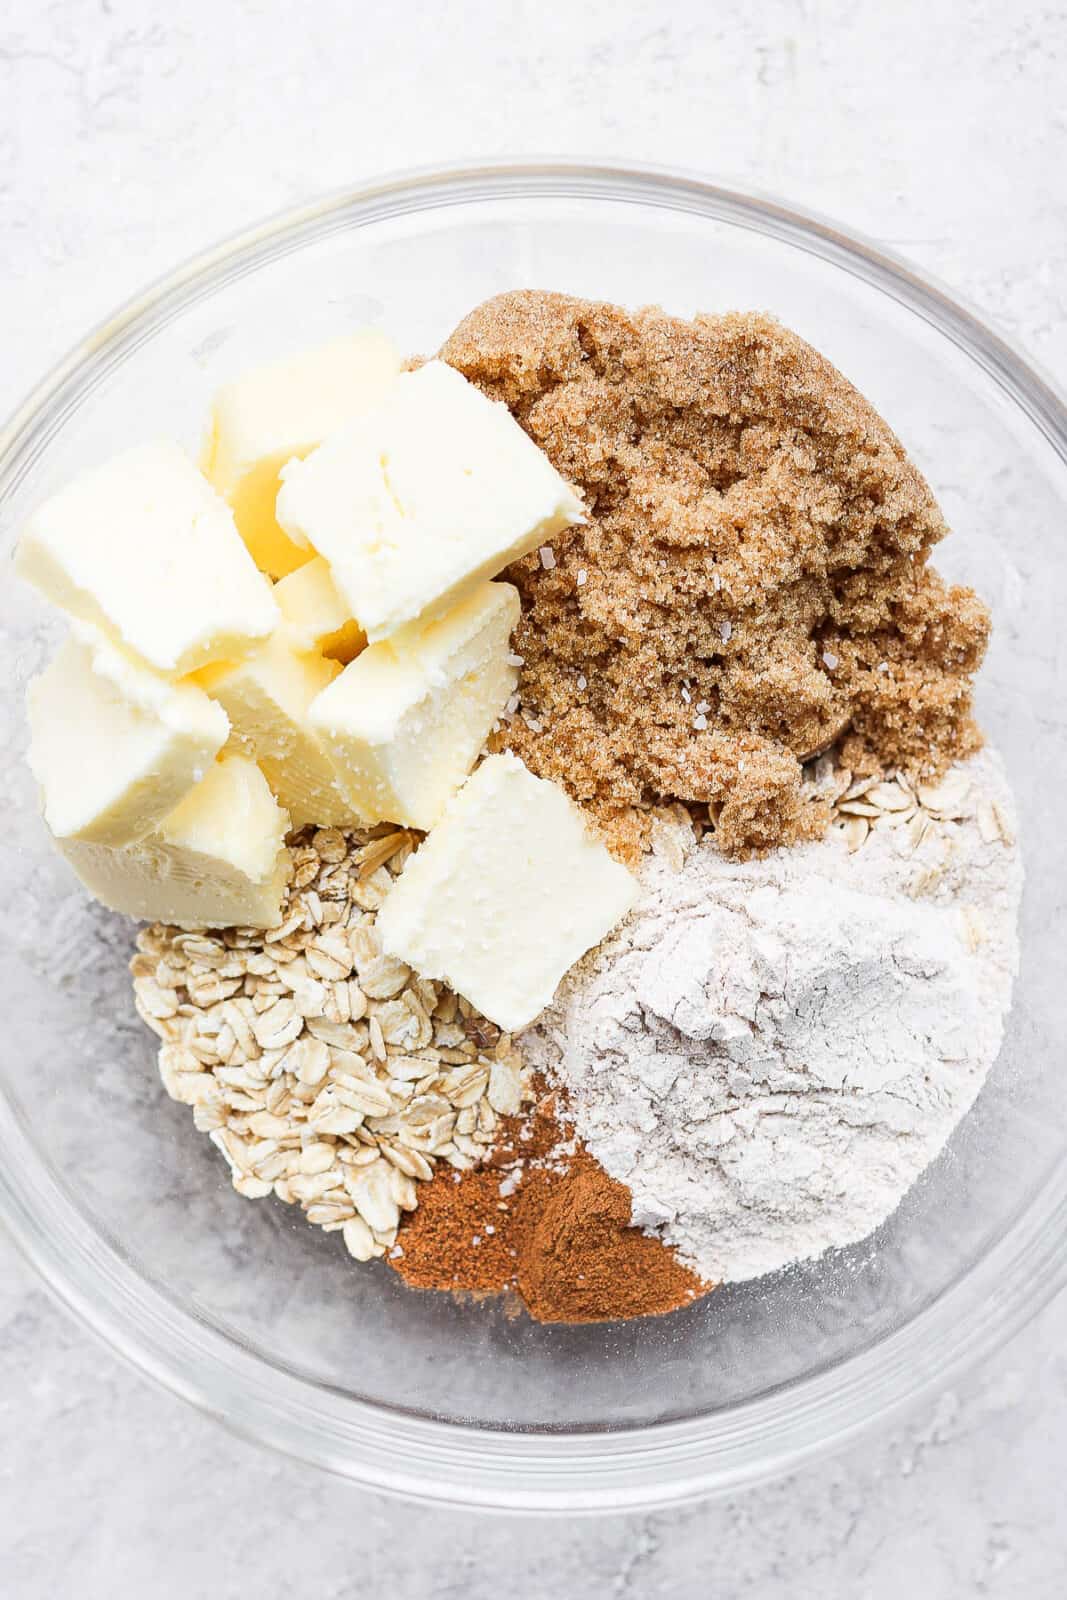 Topping ingredients in a mixing bowl.